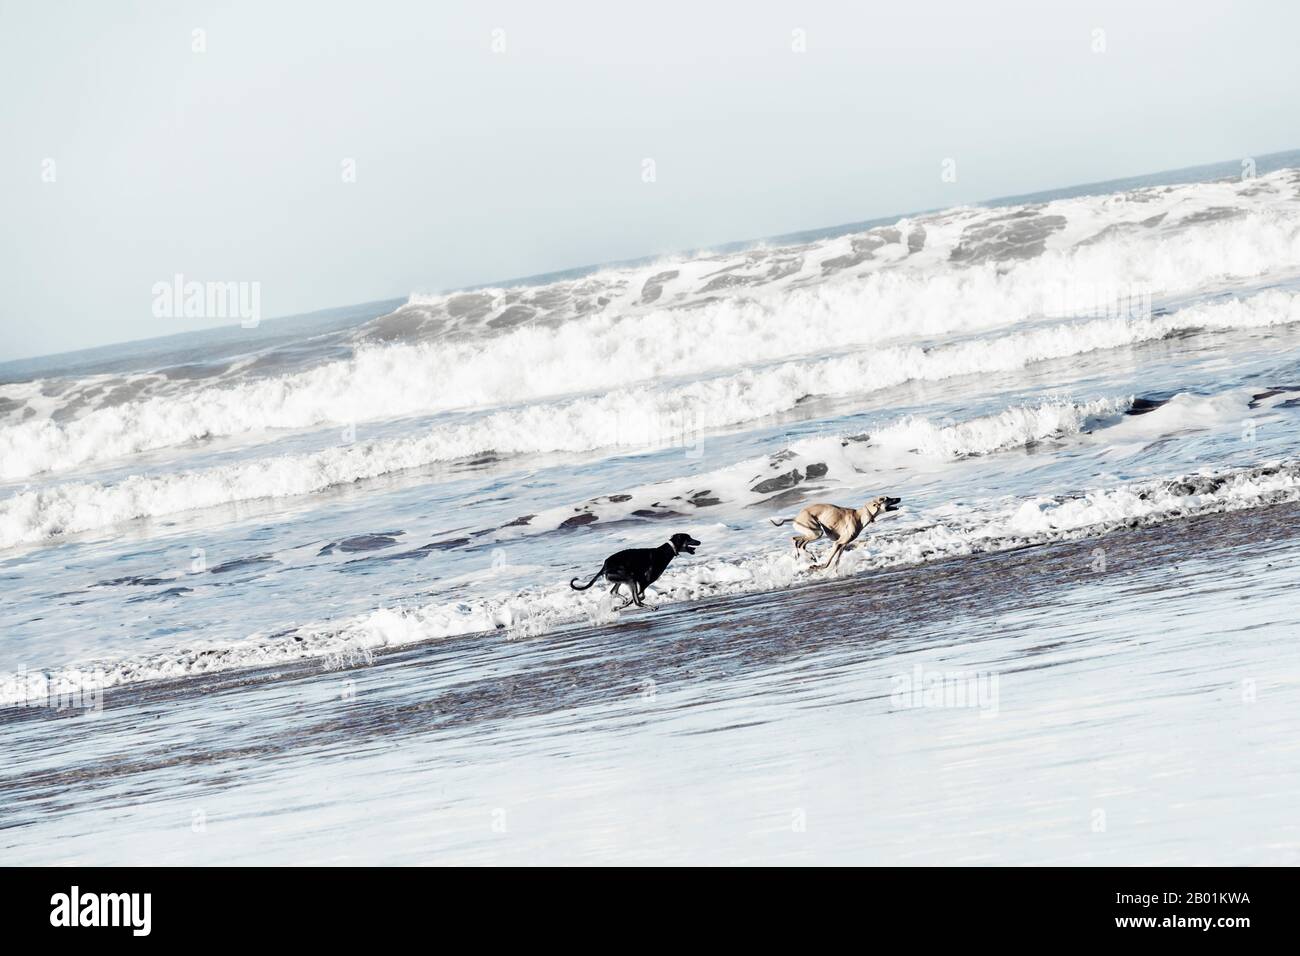 Two Sloughi dogs (Arabian greyhound) run at the beach at the Atlantic ocean in Essaouira, Morocco. High key image with muted colors. Stock Photo